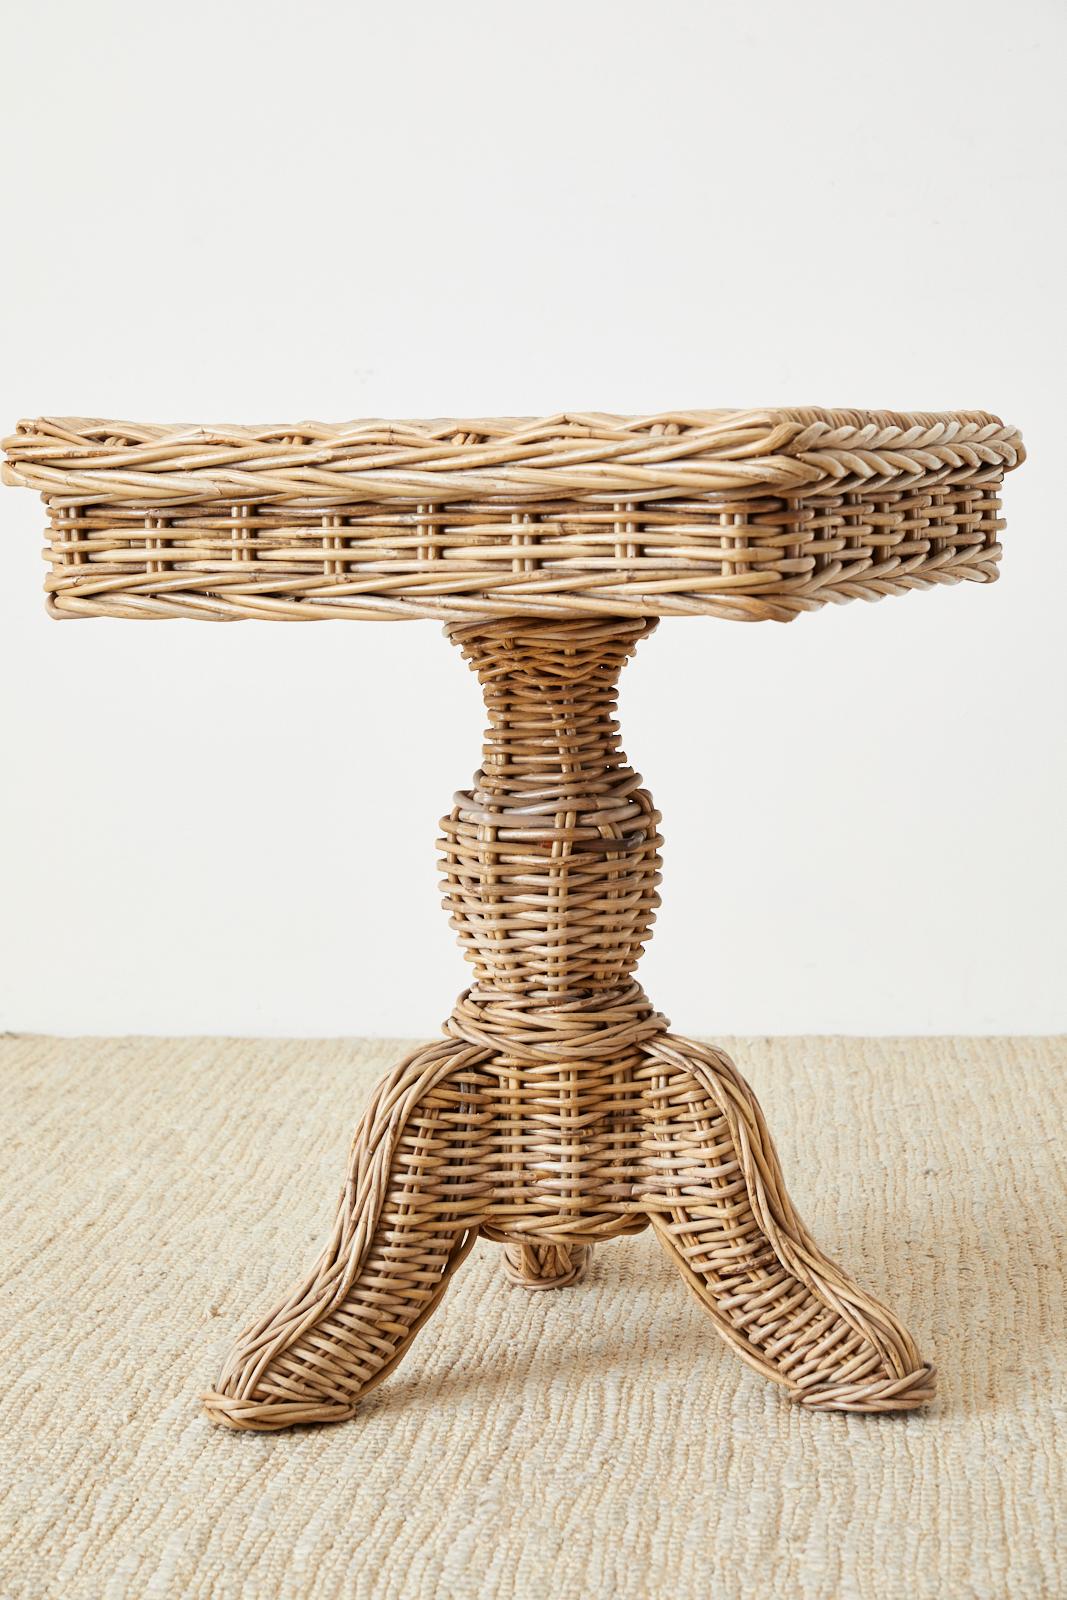 Woven Wicker and Rattan Pedestal Center Table 5